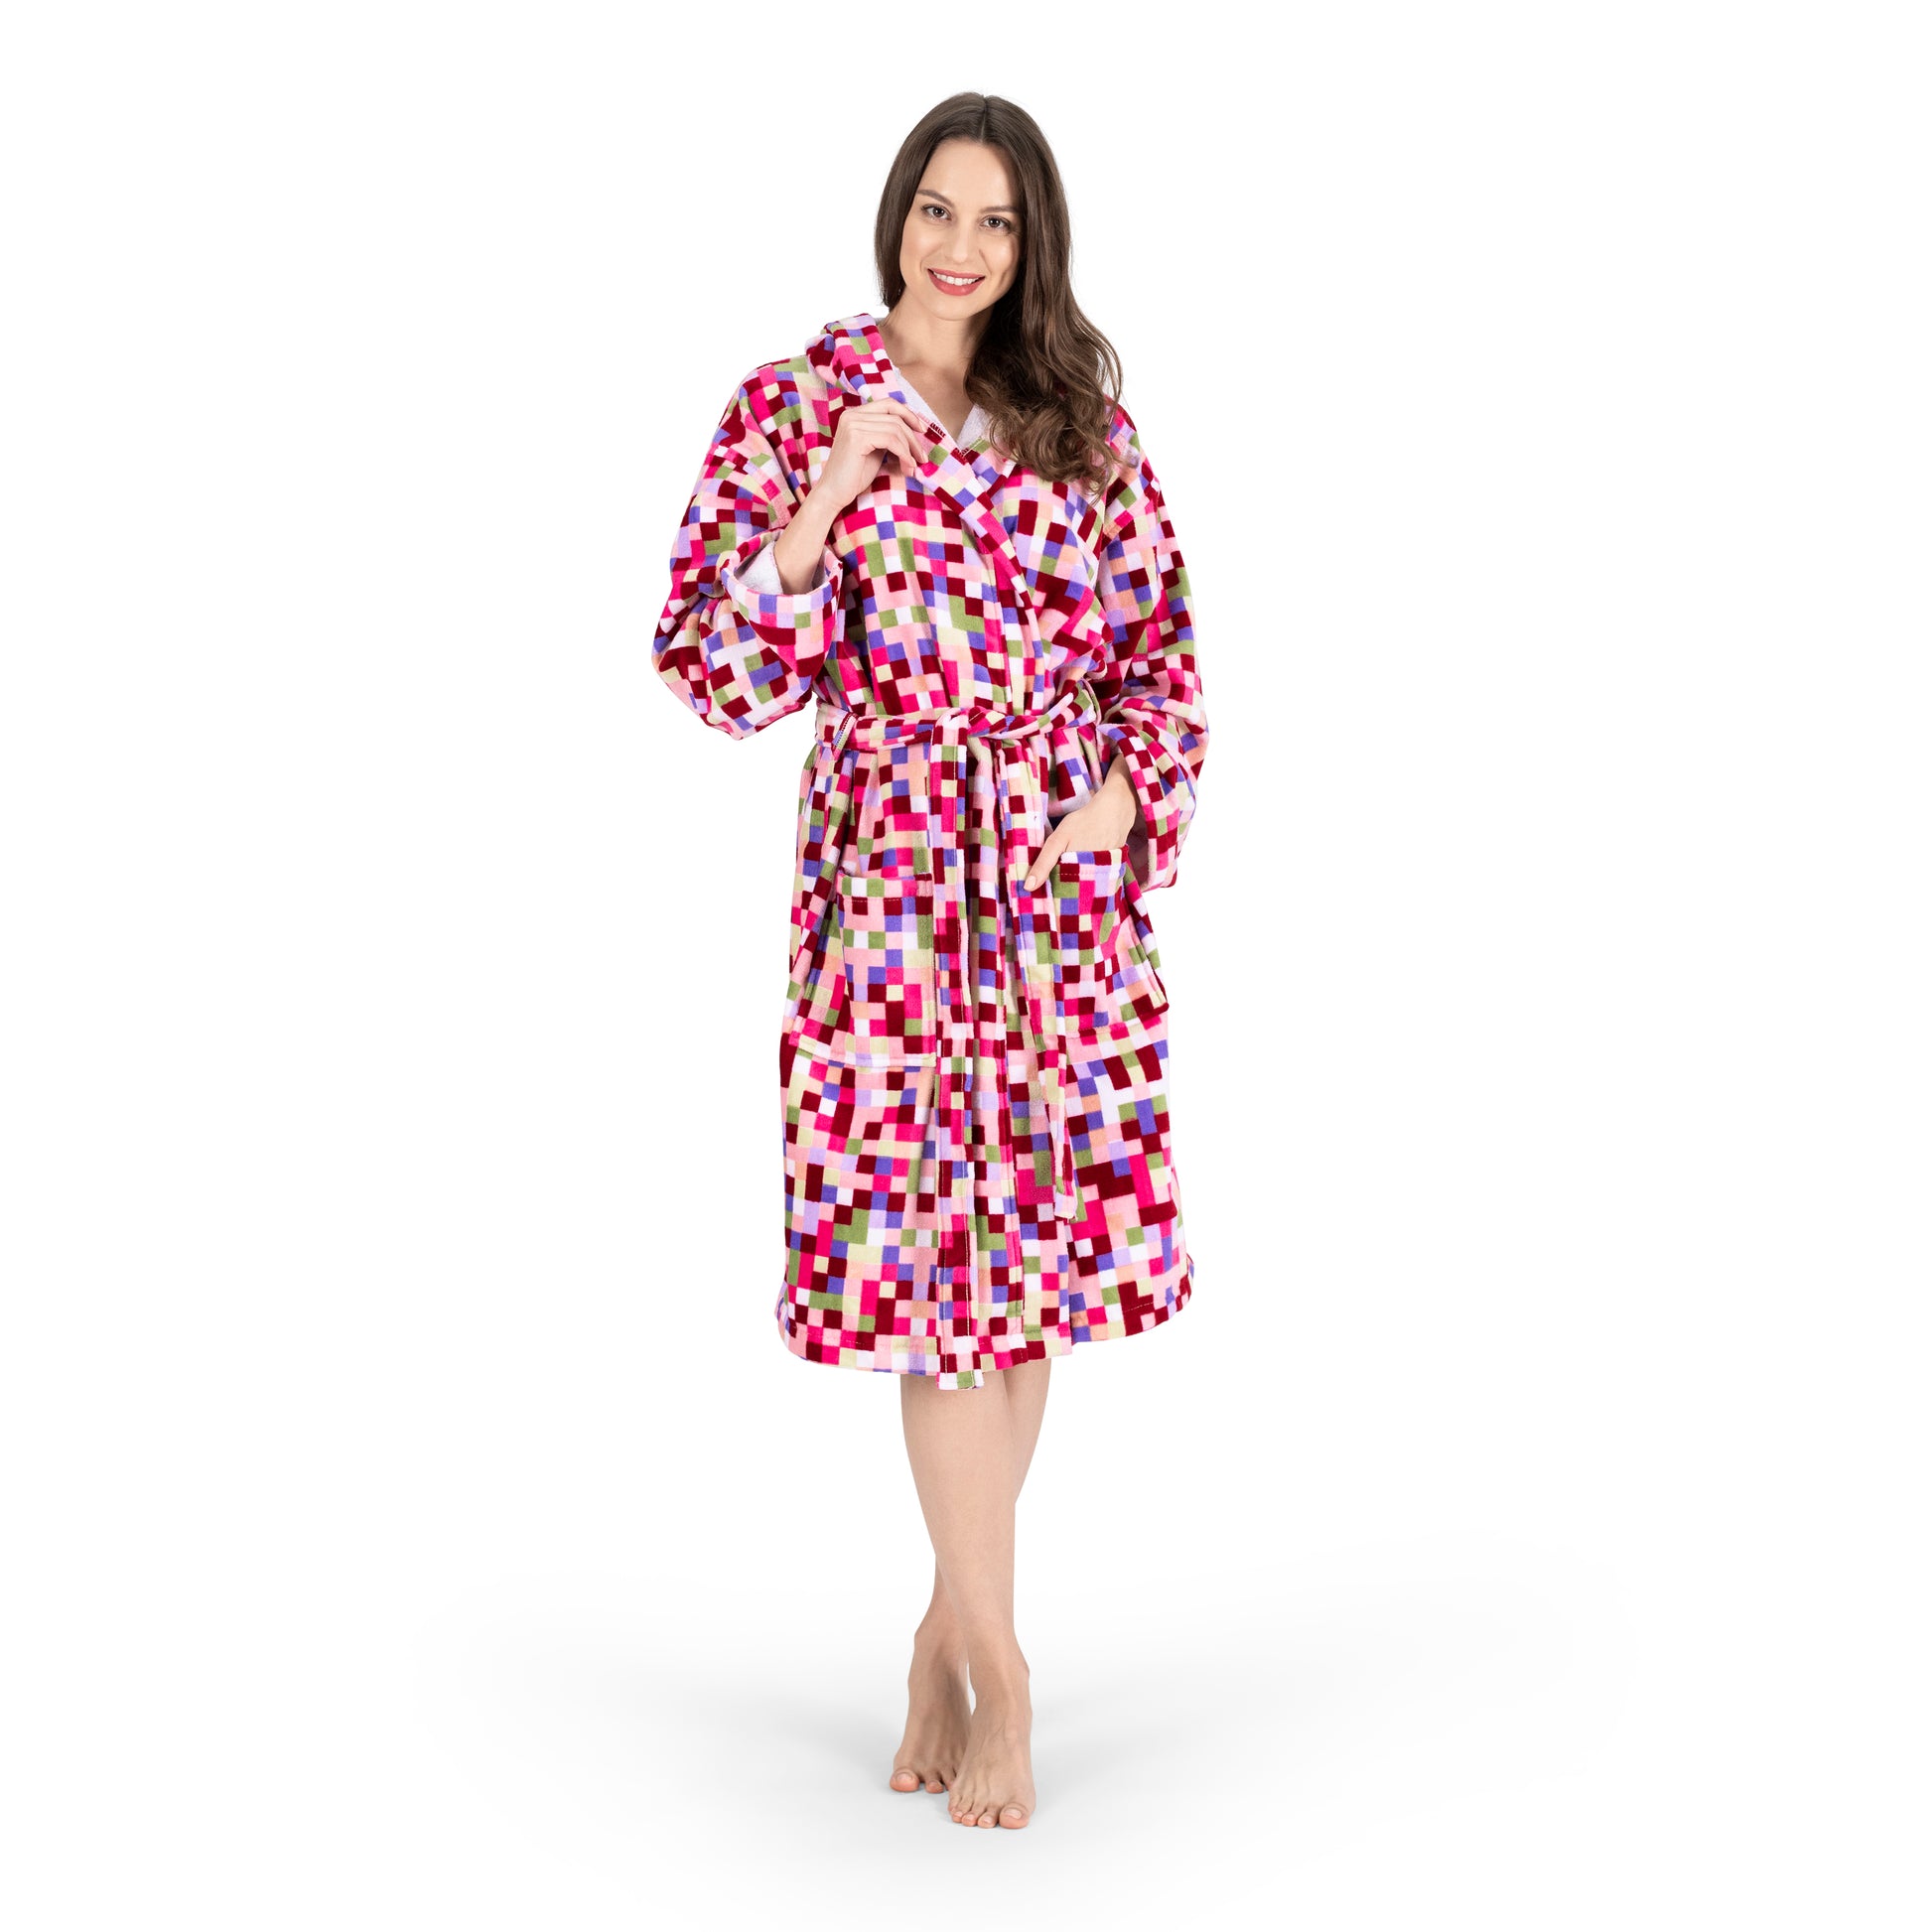 NINE WEST - Olivia Square Printed Velour Hooded Robe  - 100% Turkish Cotton - Classic Turkish Towels